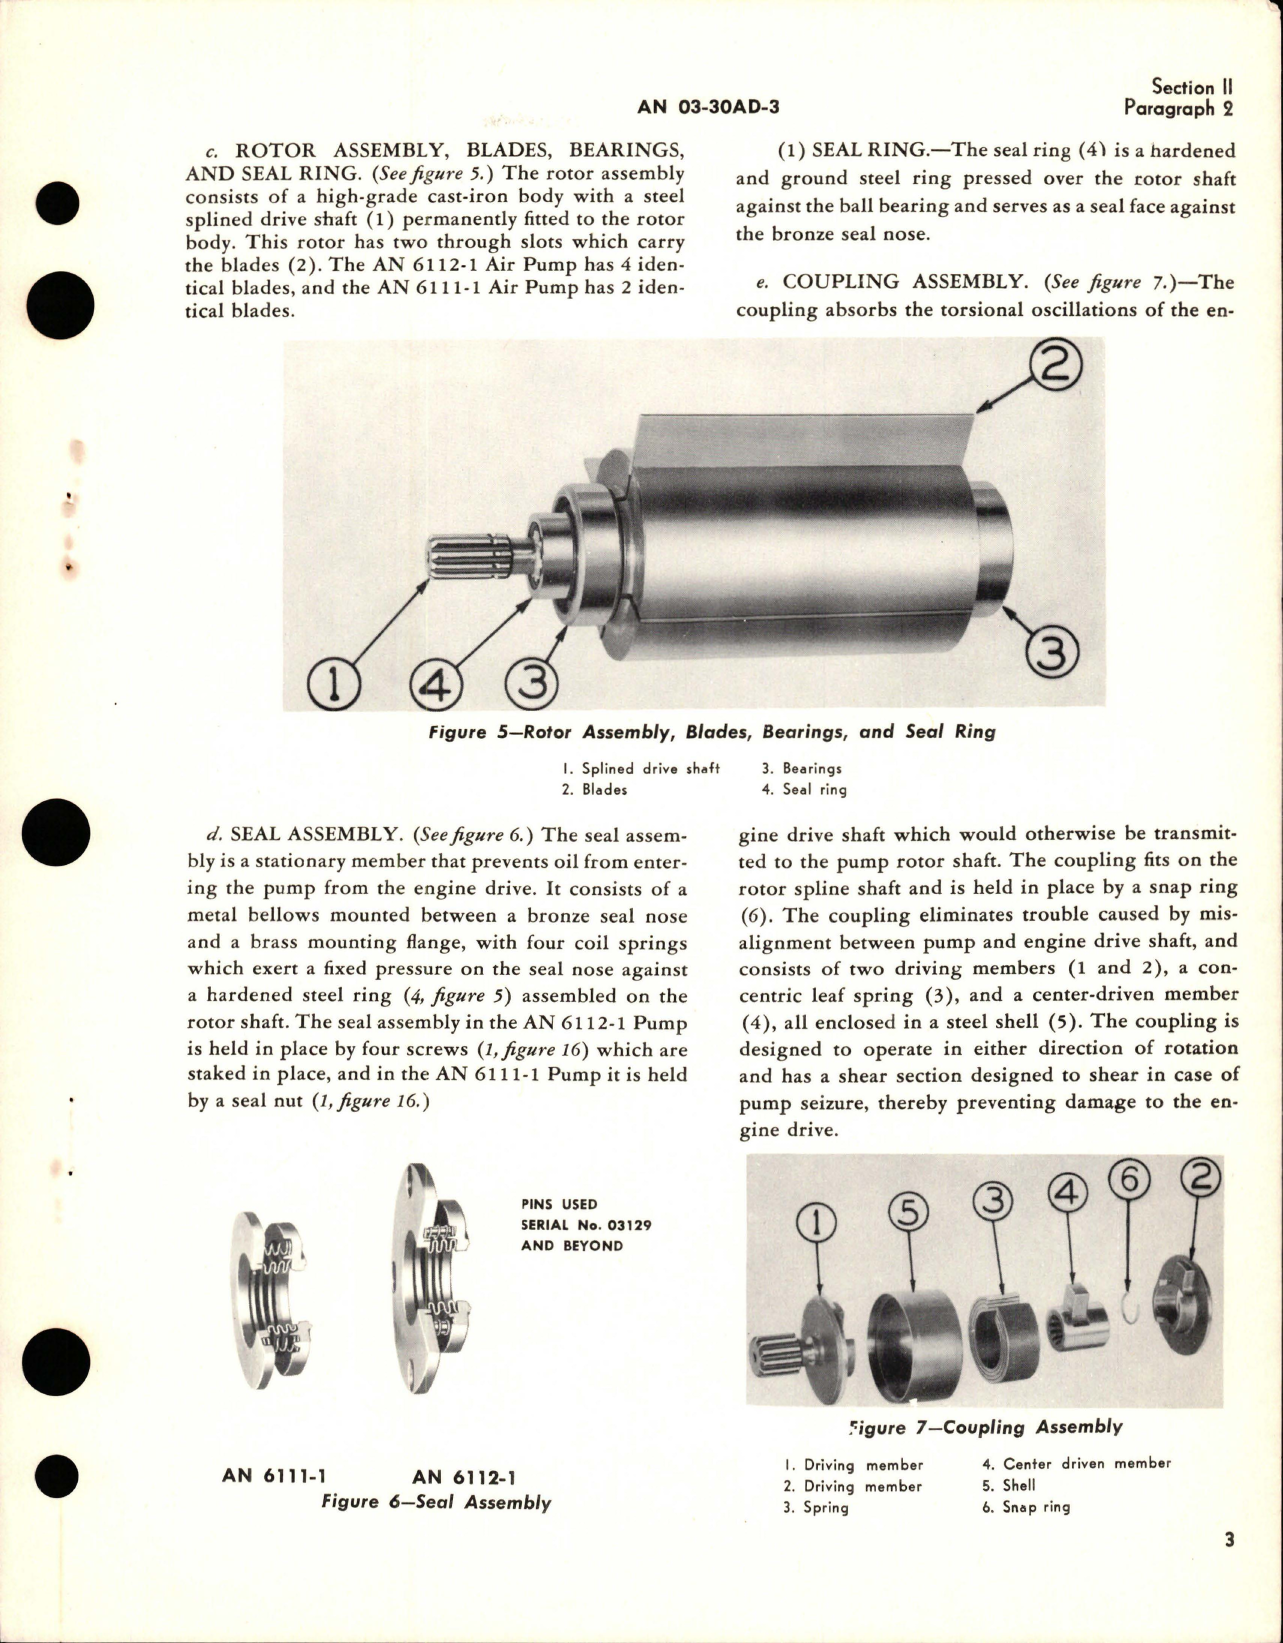 Sample page 7 from AirCorps Library document: Operation, Service and Overhaul Instructions with Parts Catalog for Air Pumps - Types AN6111-1 and AN6112-1 